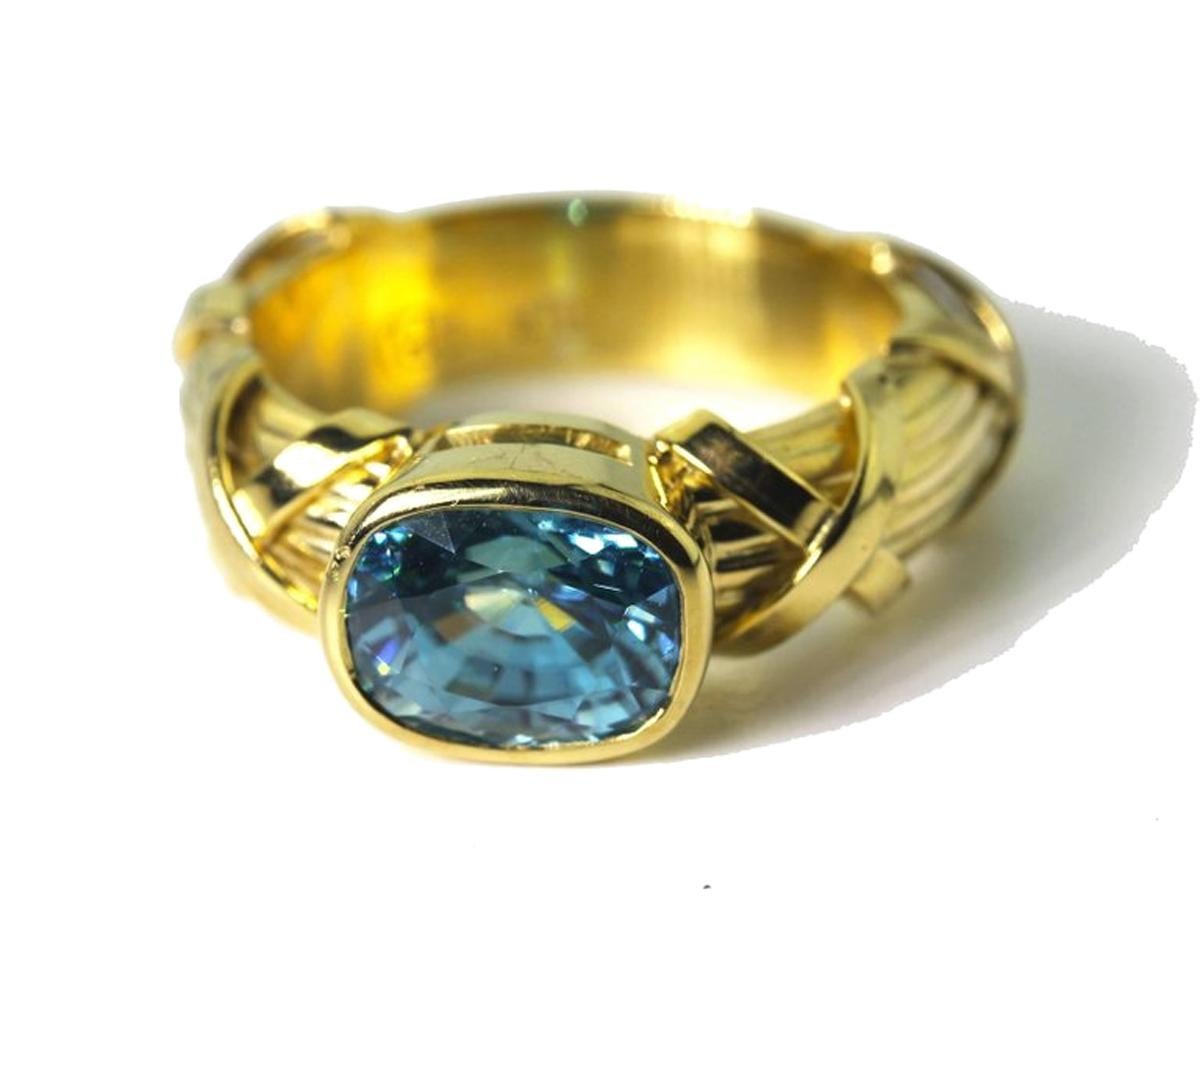 Mixed Cut AJD Contemporary Glittering Handmade 4 Ct Blue Zircon 18KT Yellow Gold Ring For Sale